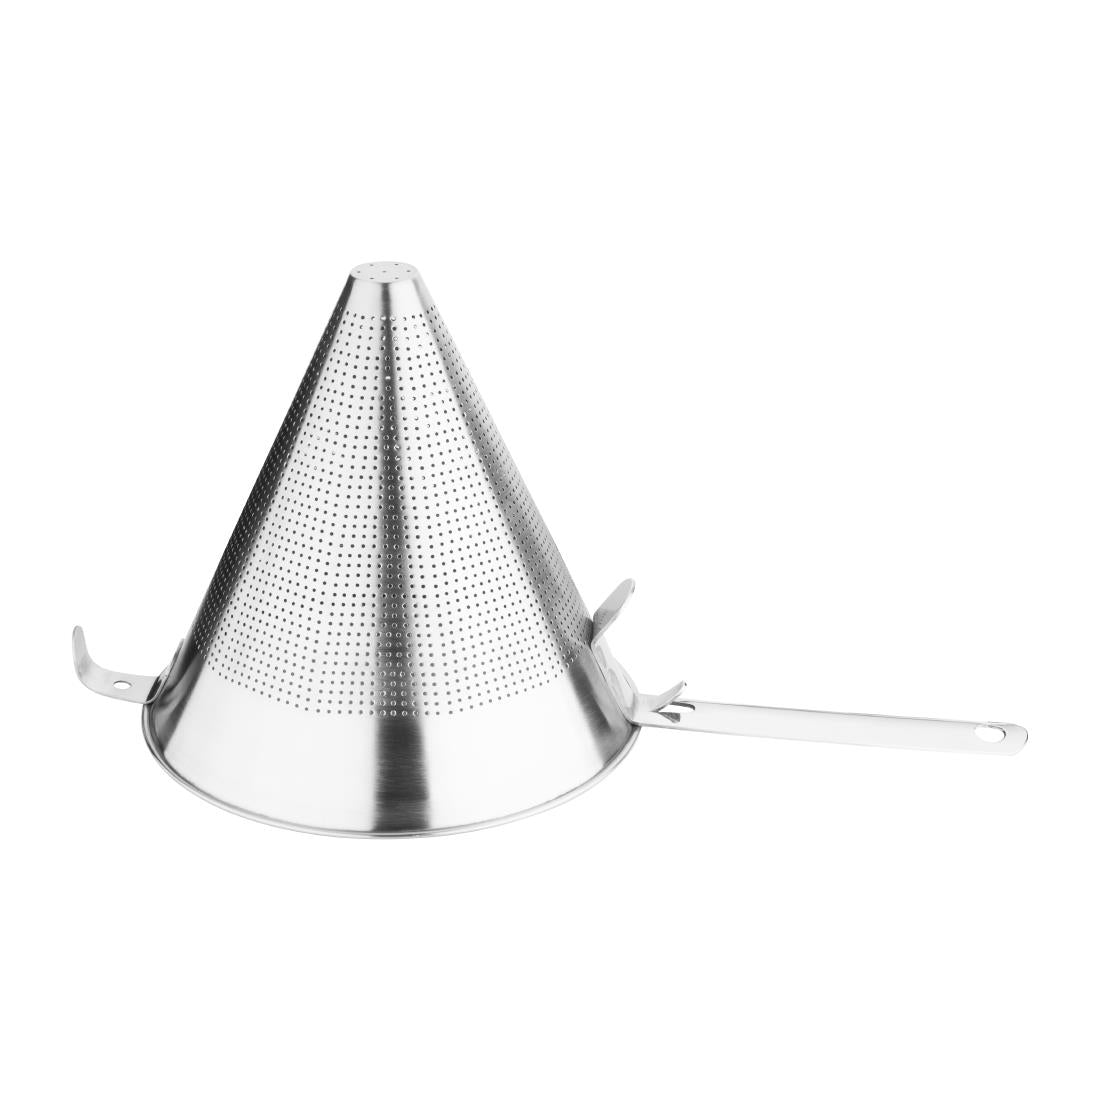 Vogue Conical Strainer 9"